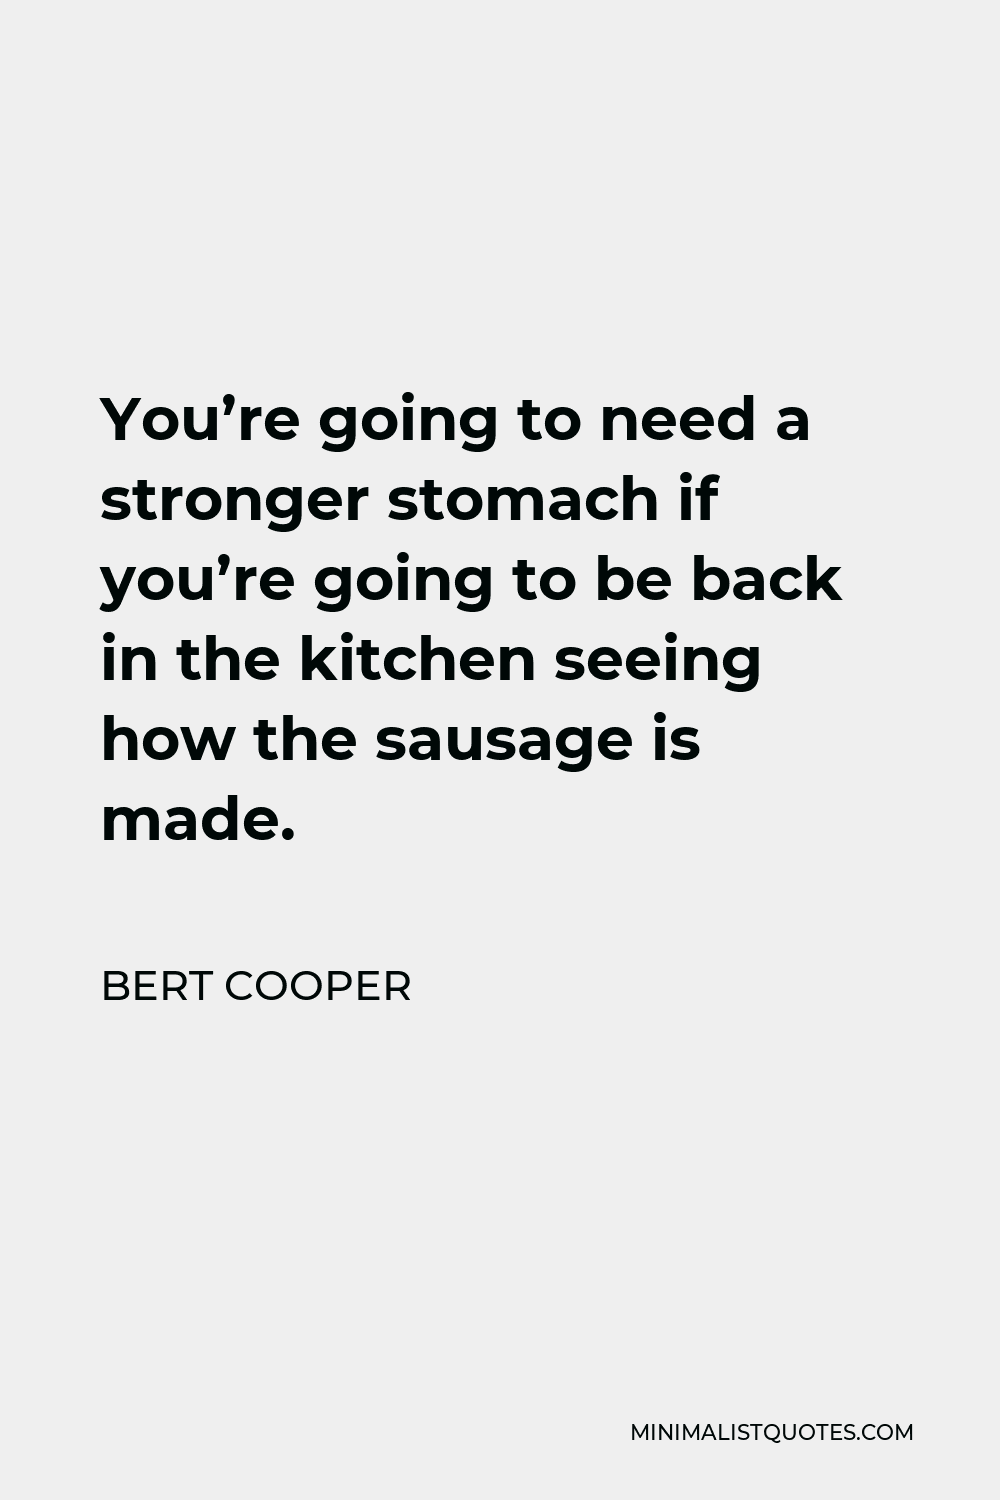 Bert Cooper Quote - You’re going to need a stronger stomach if you’re going to be back in the kitchen seeing how the sausage is made.